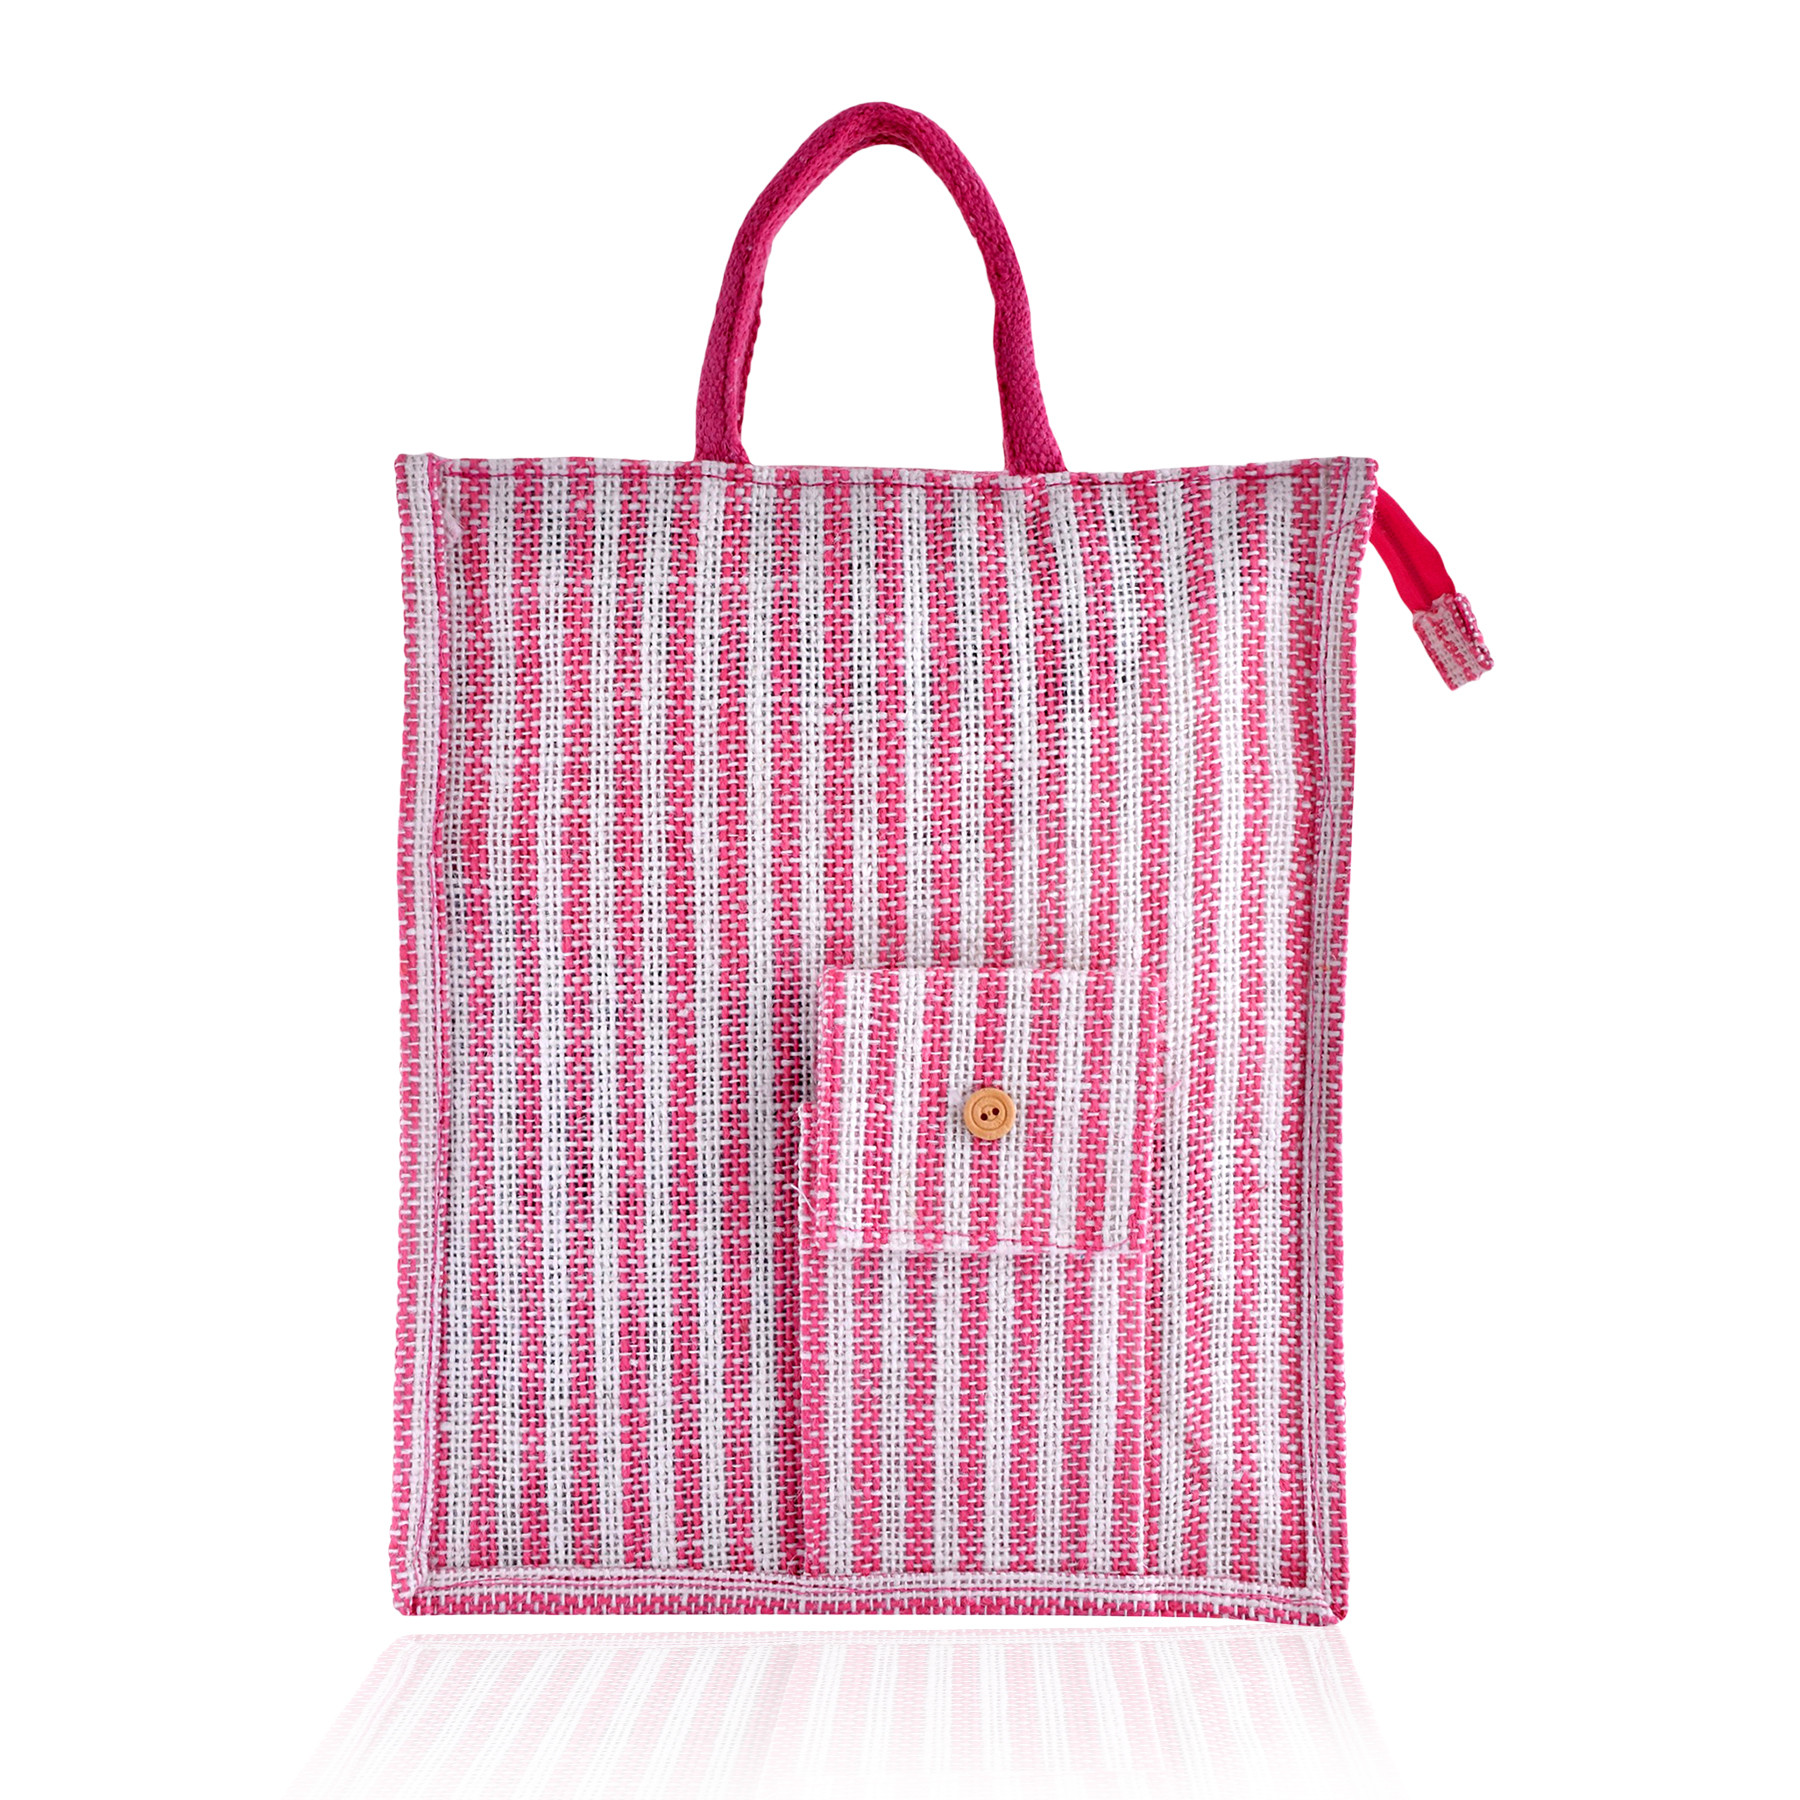 Kuber Industries Shopping Bag | Jute Carry Bag | Zipper Grocery Bag with Handle | Reusable Shopping Bag | Carrying Bag With Front Pocket | Lining-Grocery Bag | Medium | Pink